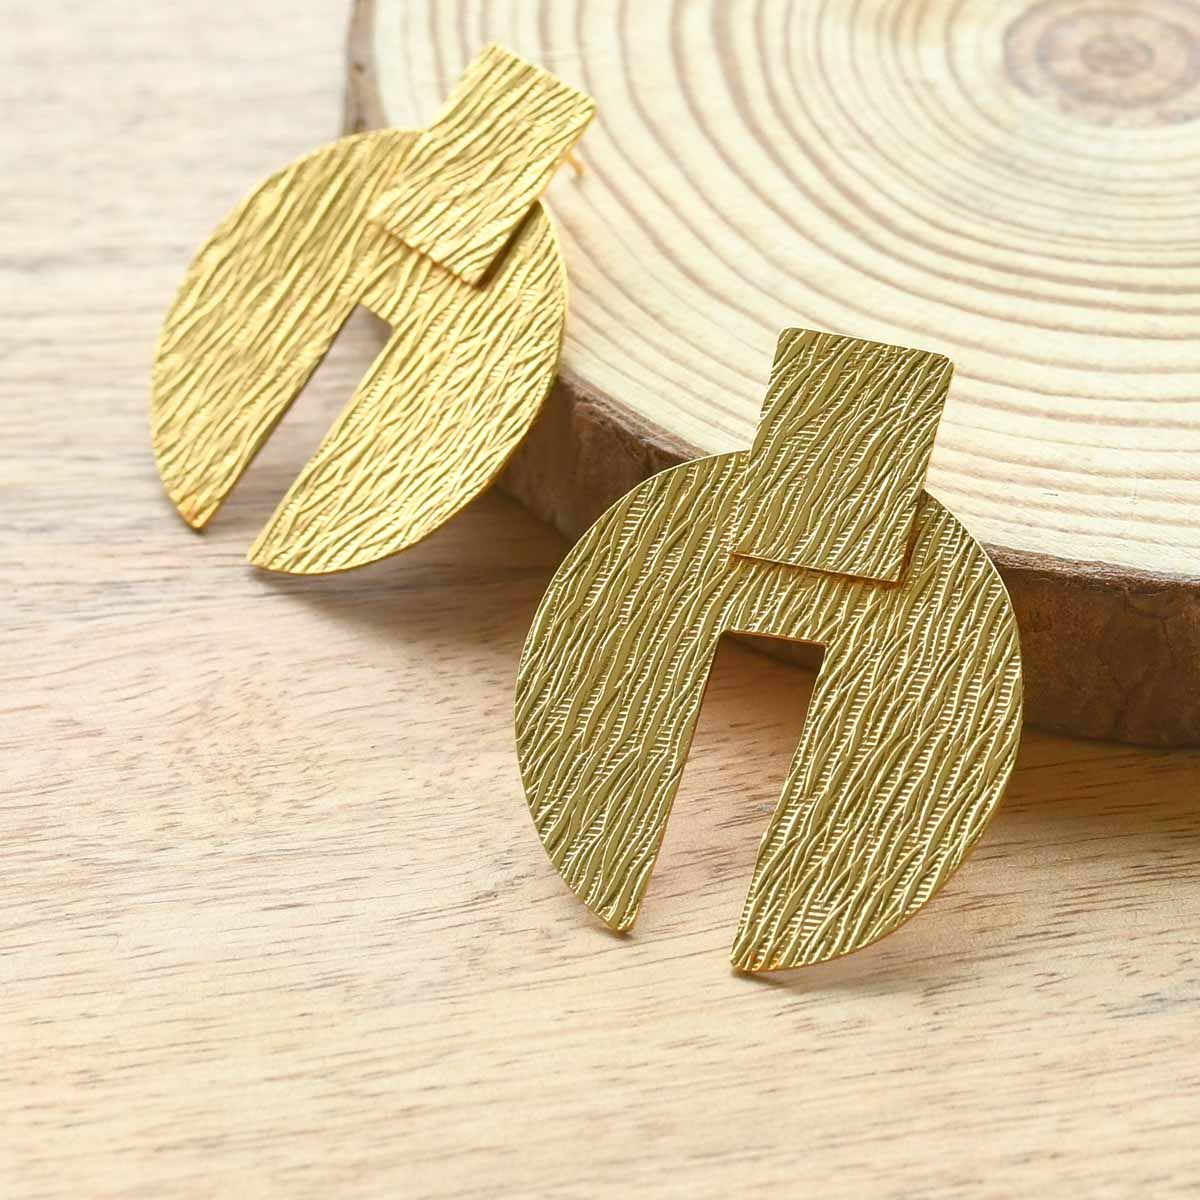 18K Gold Plated Textured Geometric Earrings